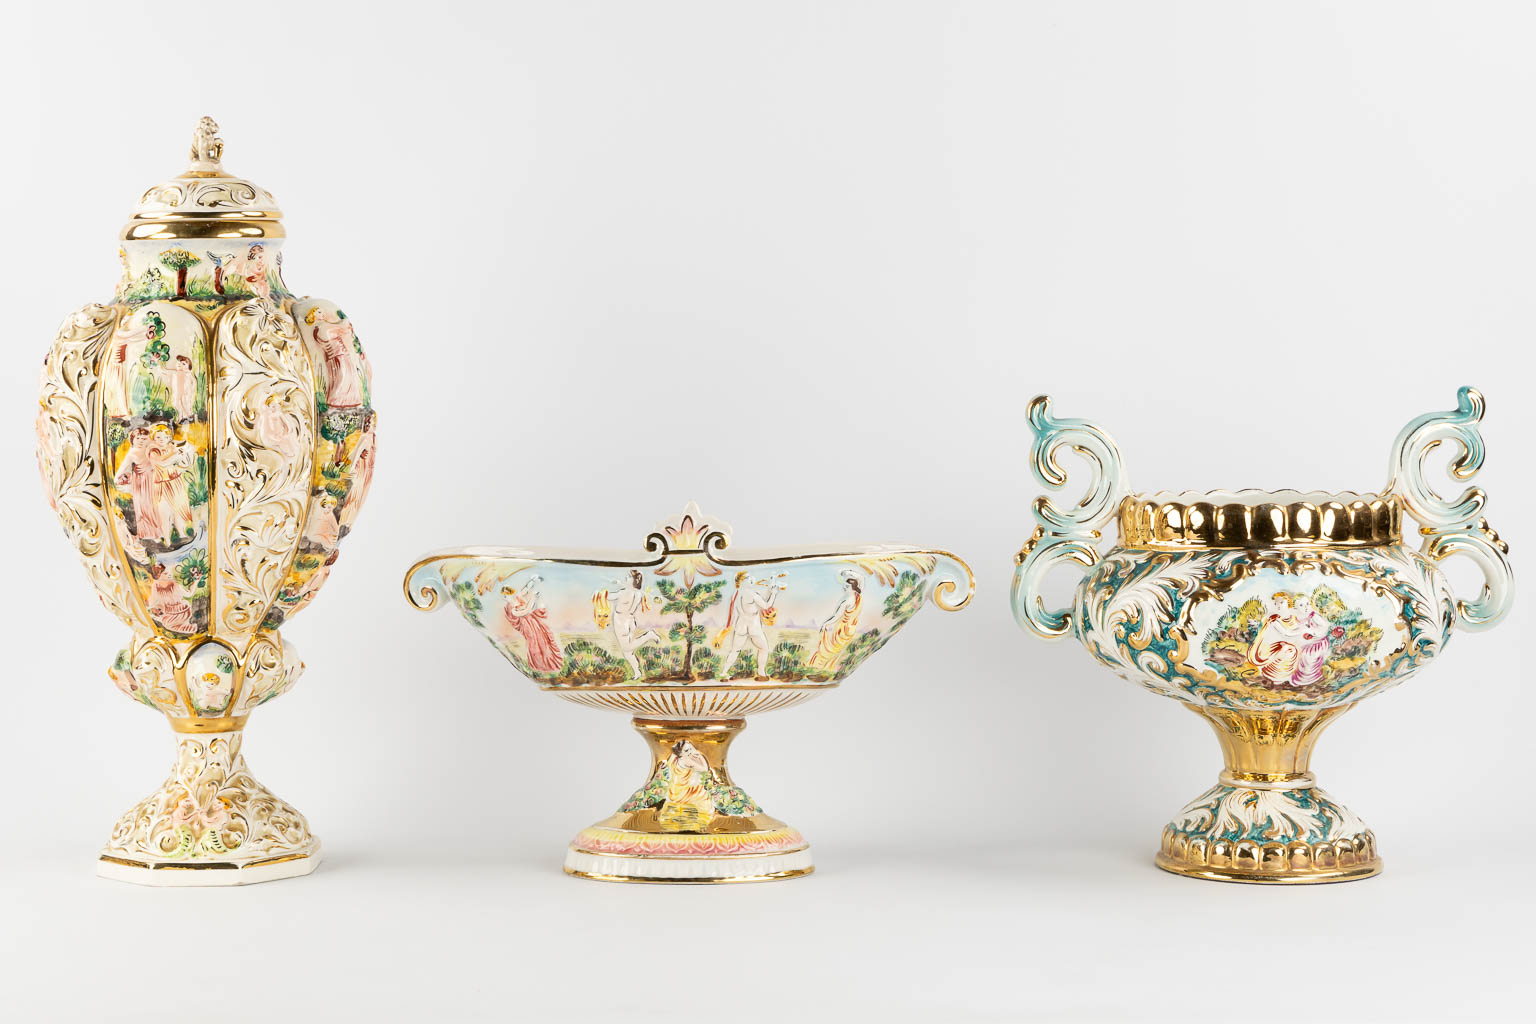 Six large bowls and vases, glazed faience, Capodimonte, Italy. (H:52 x D:23 cm)